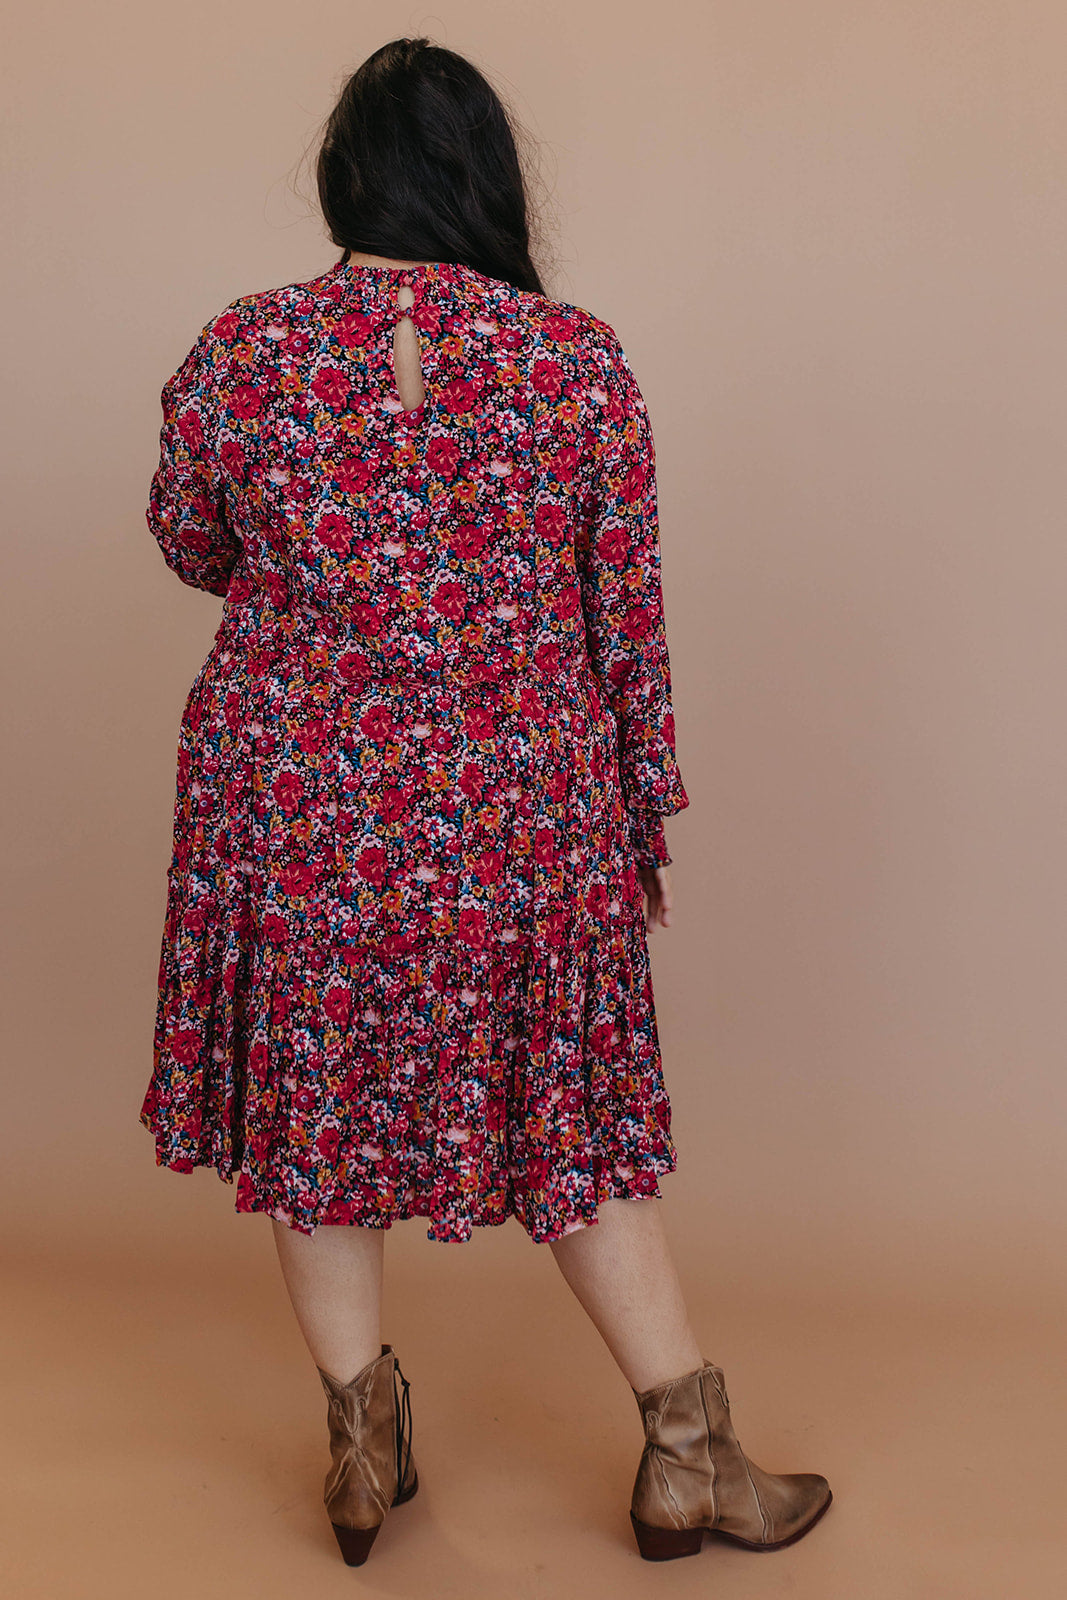 THE JUNIE SMOCKED DRESS IN CHERRY